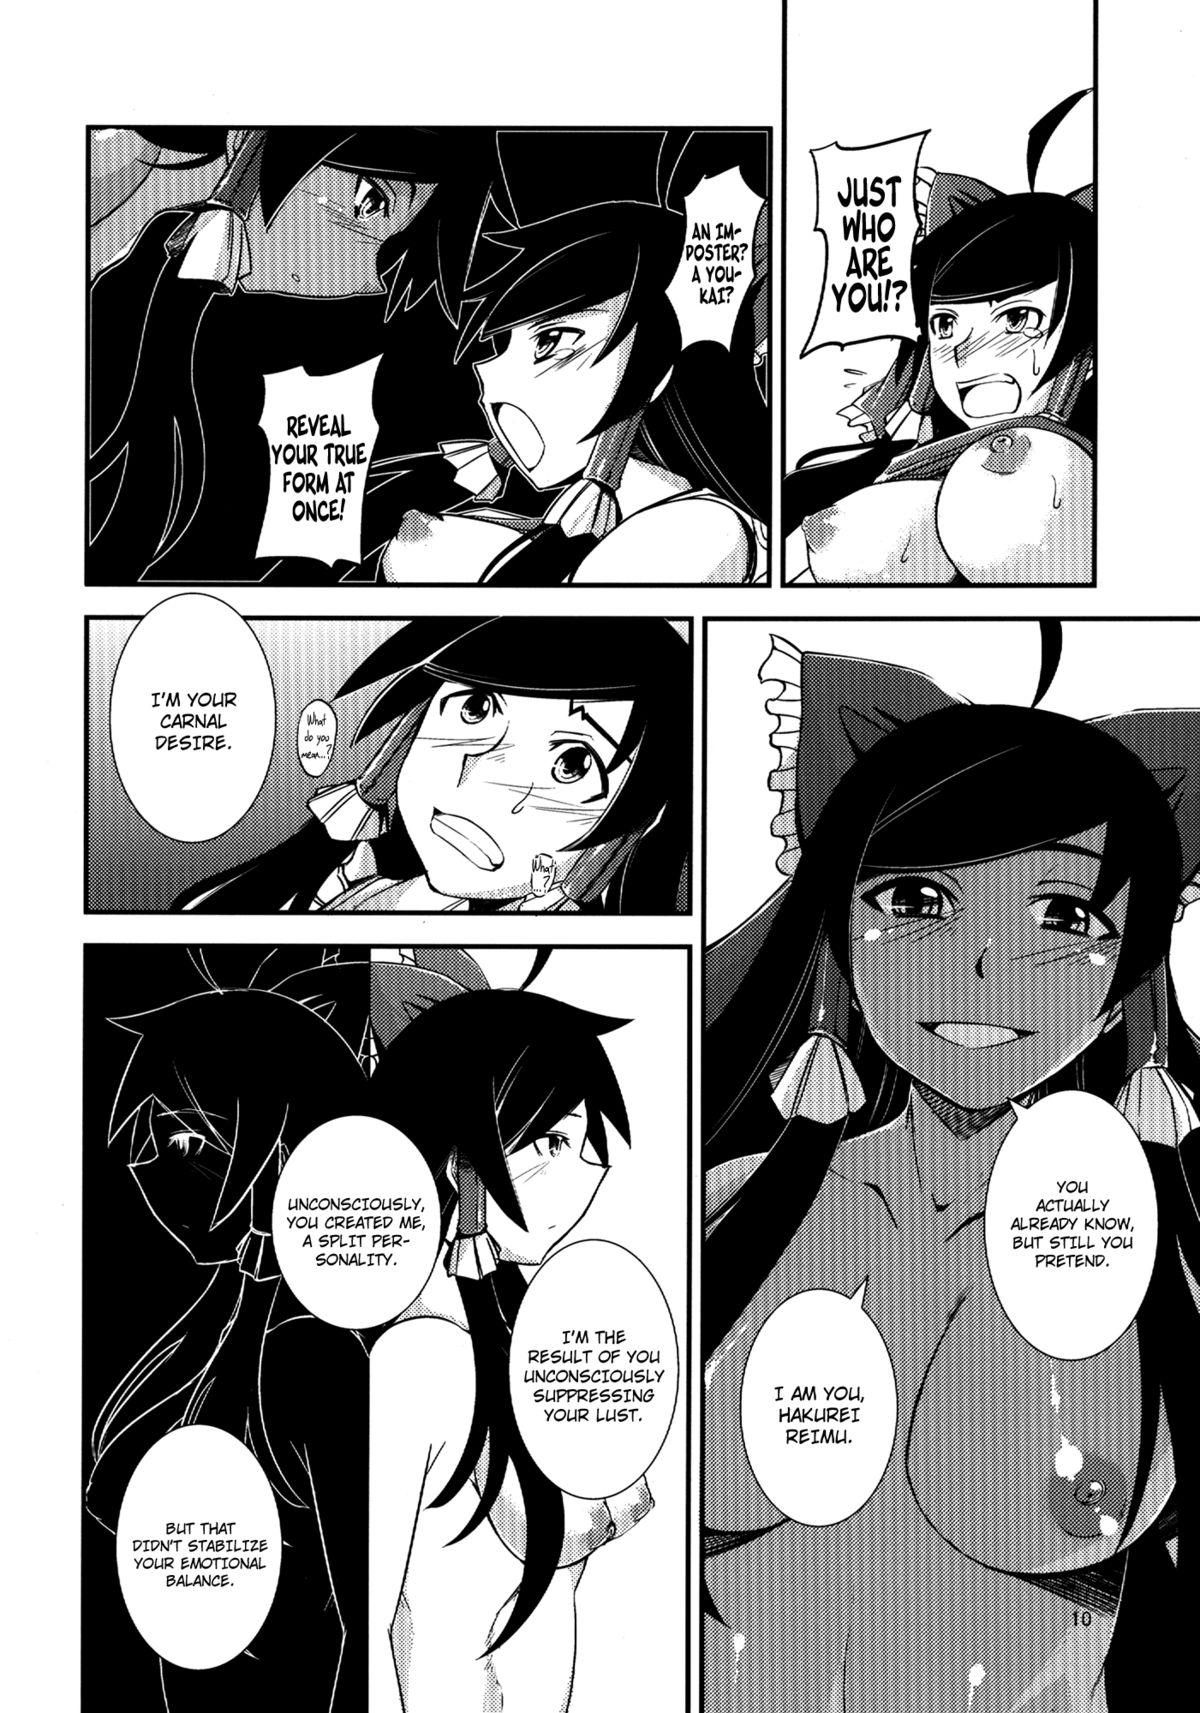 Euro The Incident of the Black Shrine Maiden - Touhou project Tight Ass - Page 10